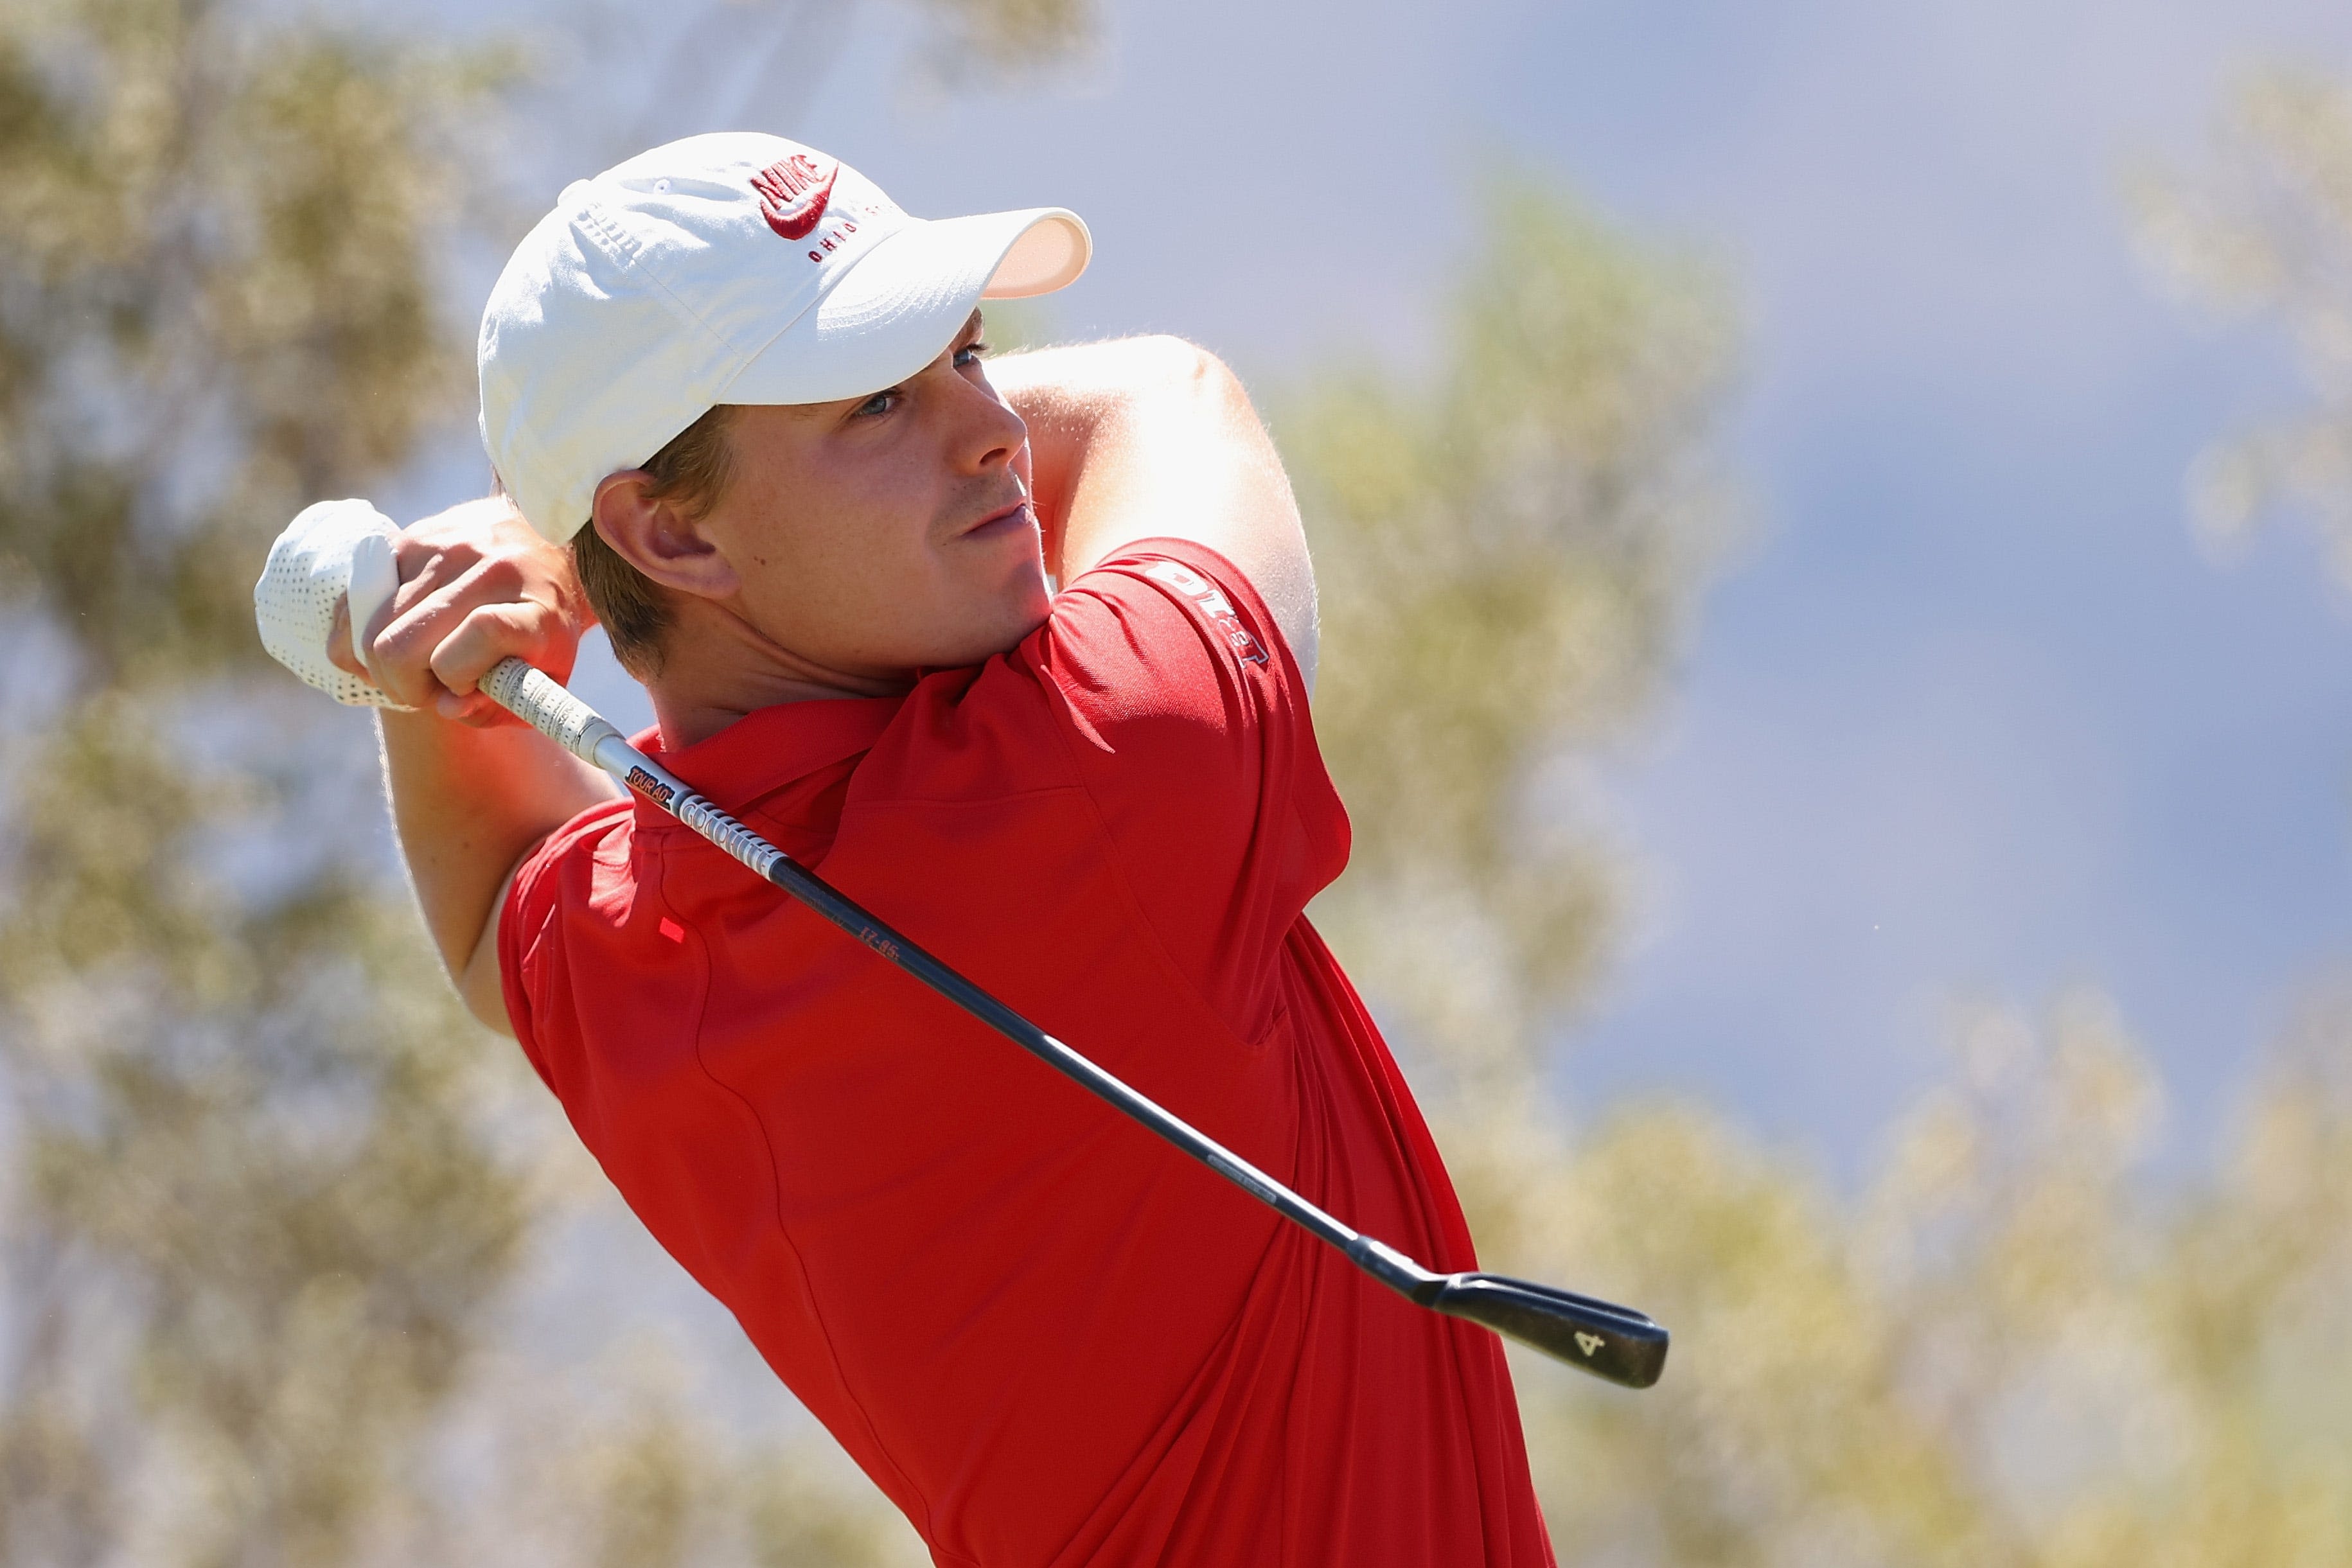 Ohio State advances to match play at NCAA men's golf championship